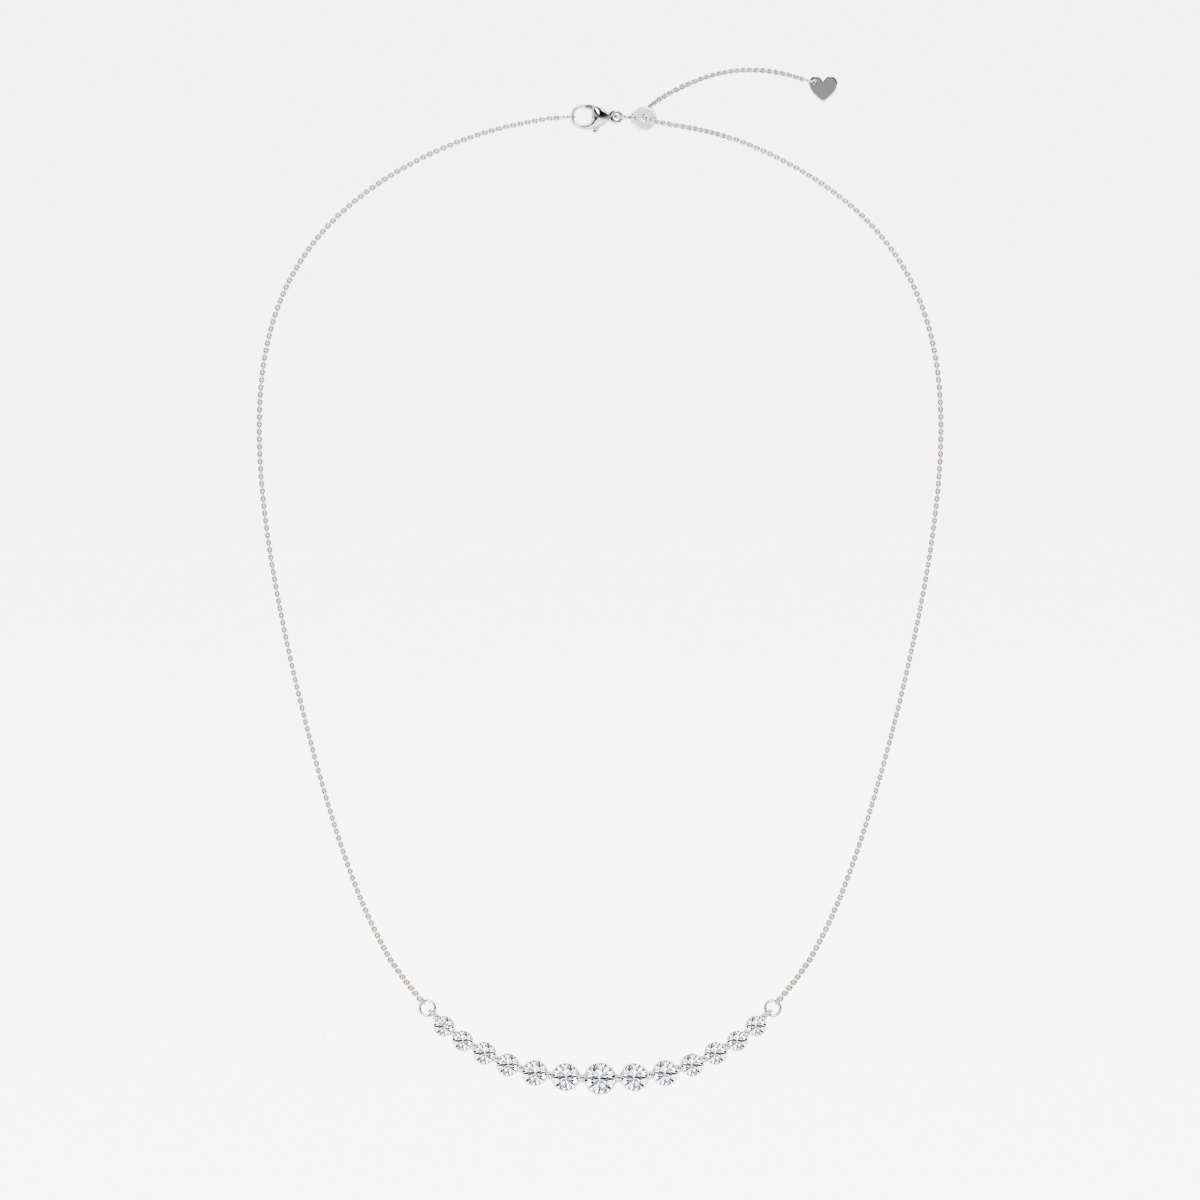 Additional Image 1 for  2 ctw Round Lab Grown Diamond Curved Center Fashion Necklace